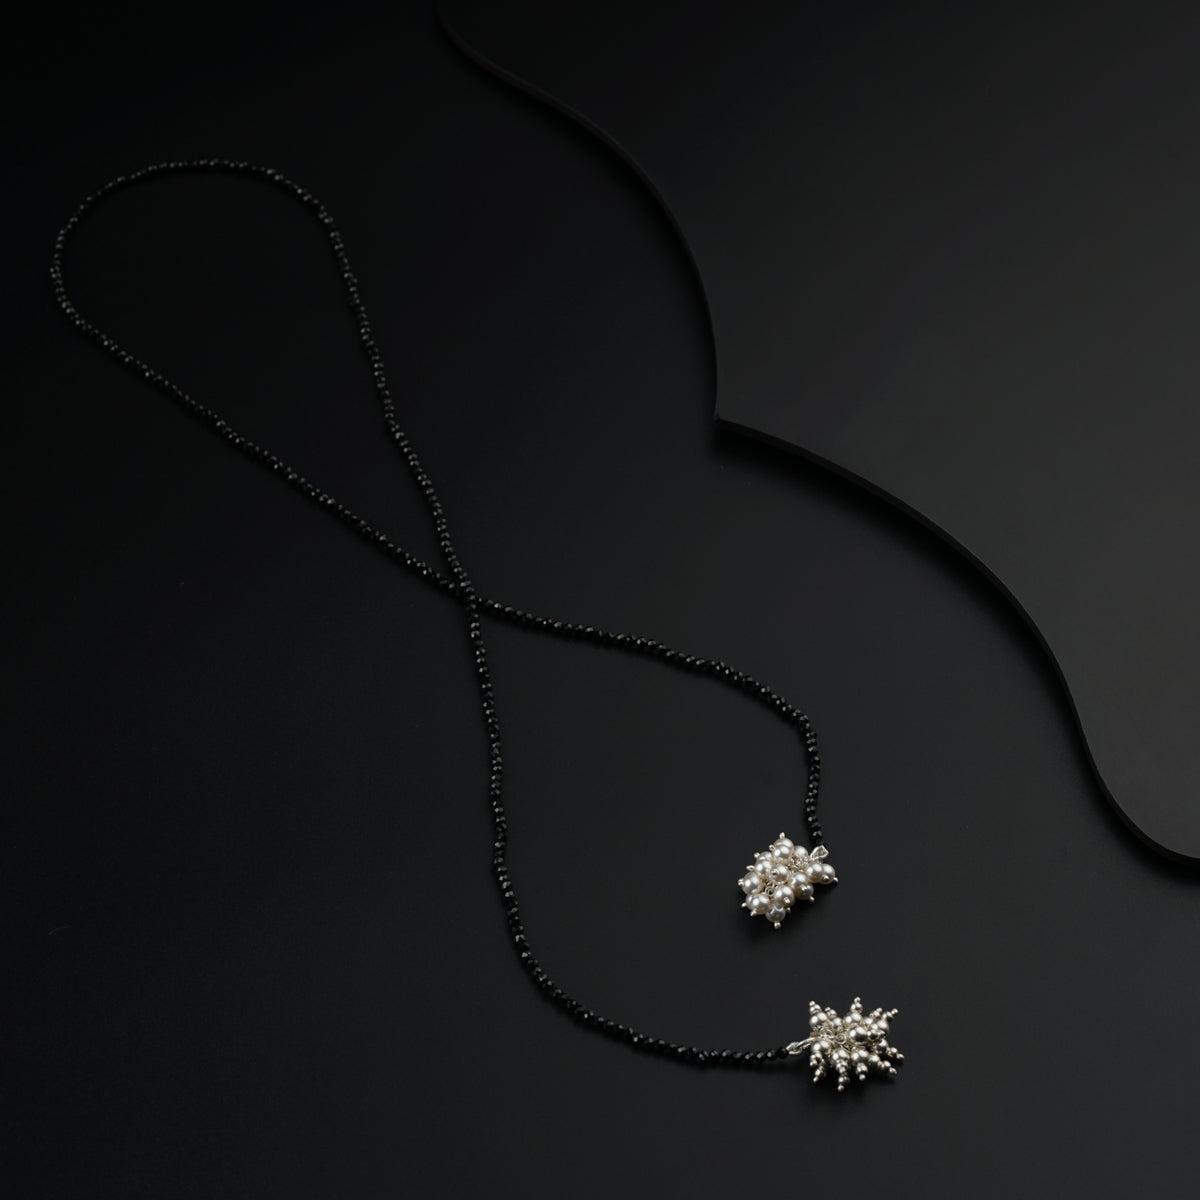 a black necklace with a snowflake pendant